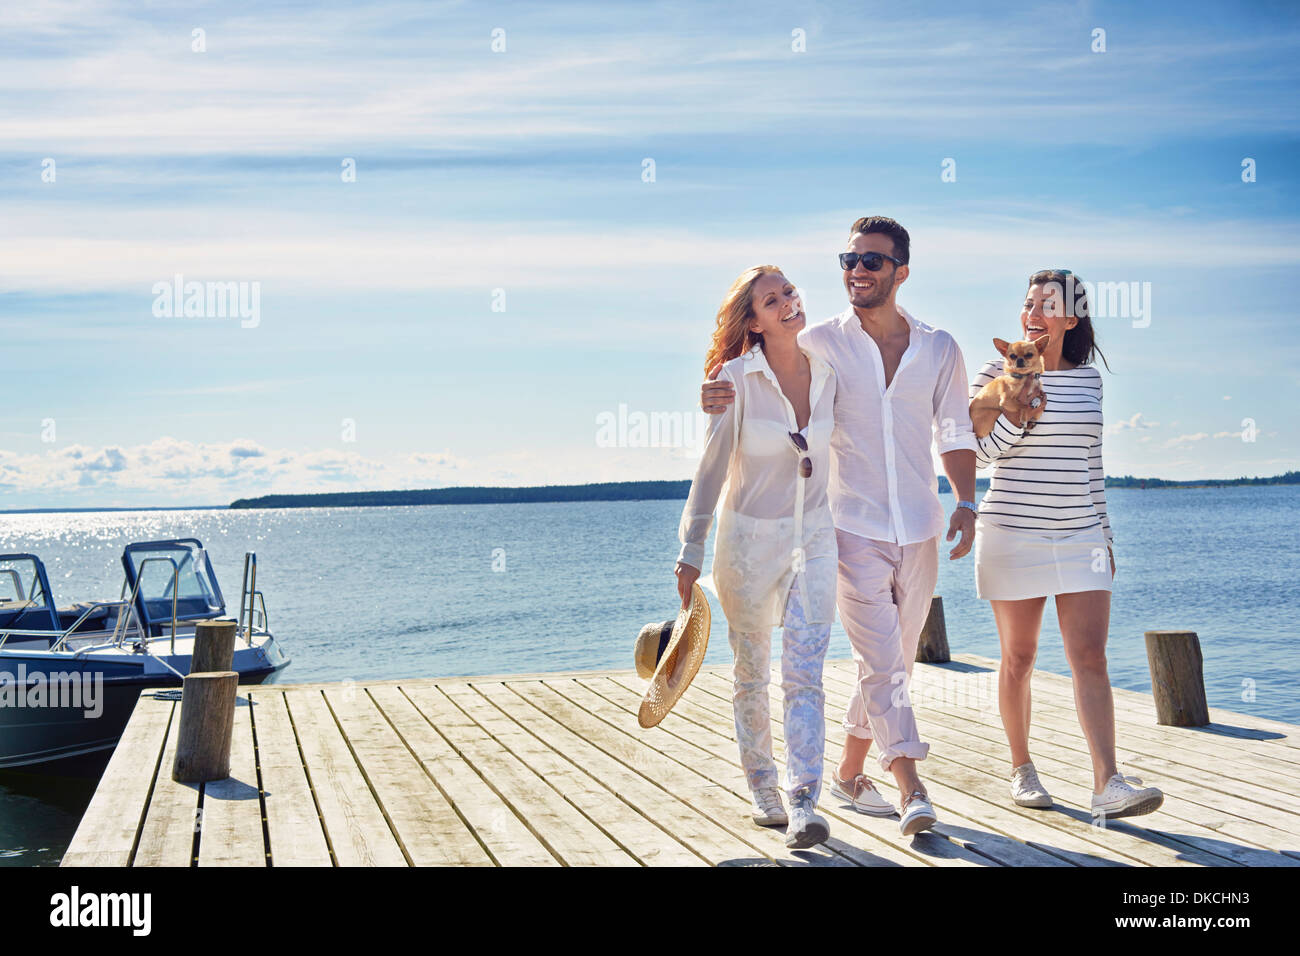 Young adults walking on pier, Gavle, Sweden Stock Photo